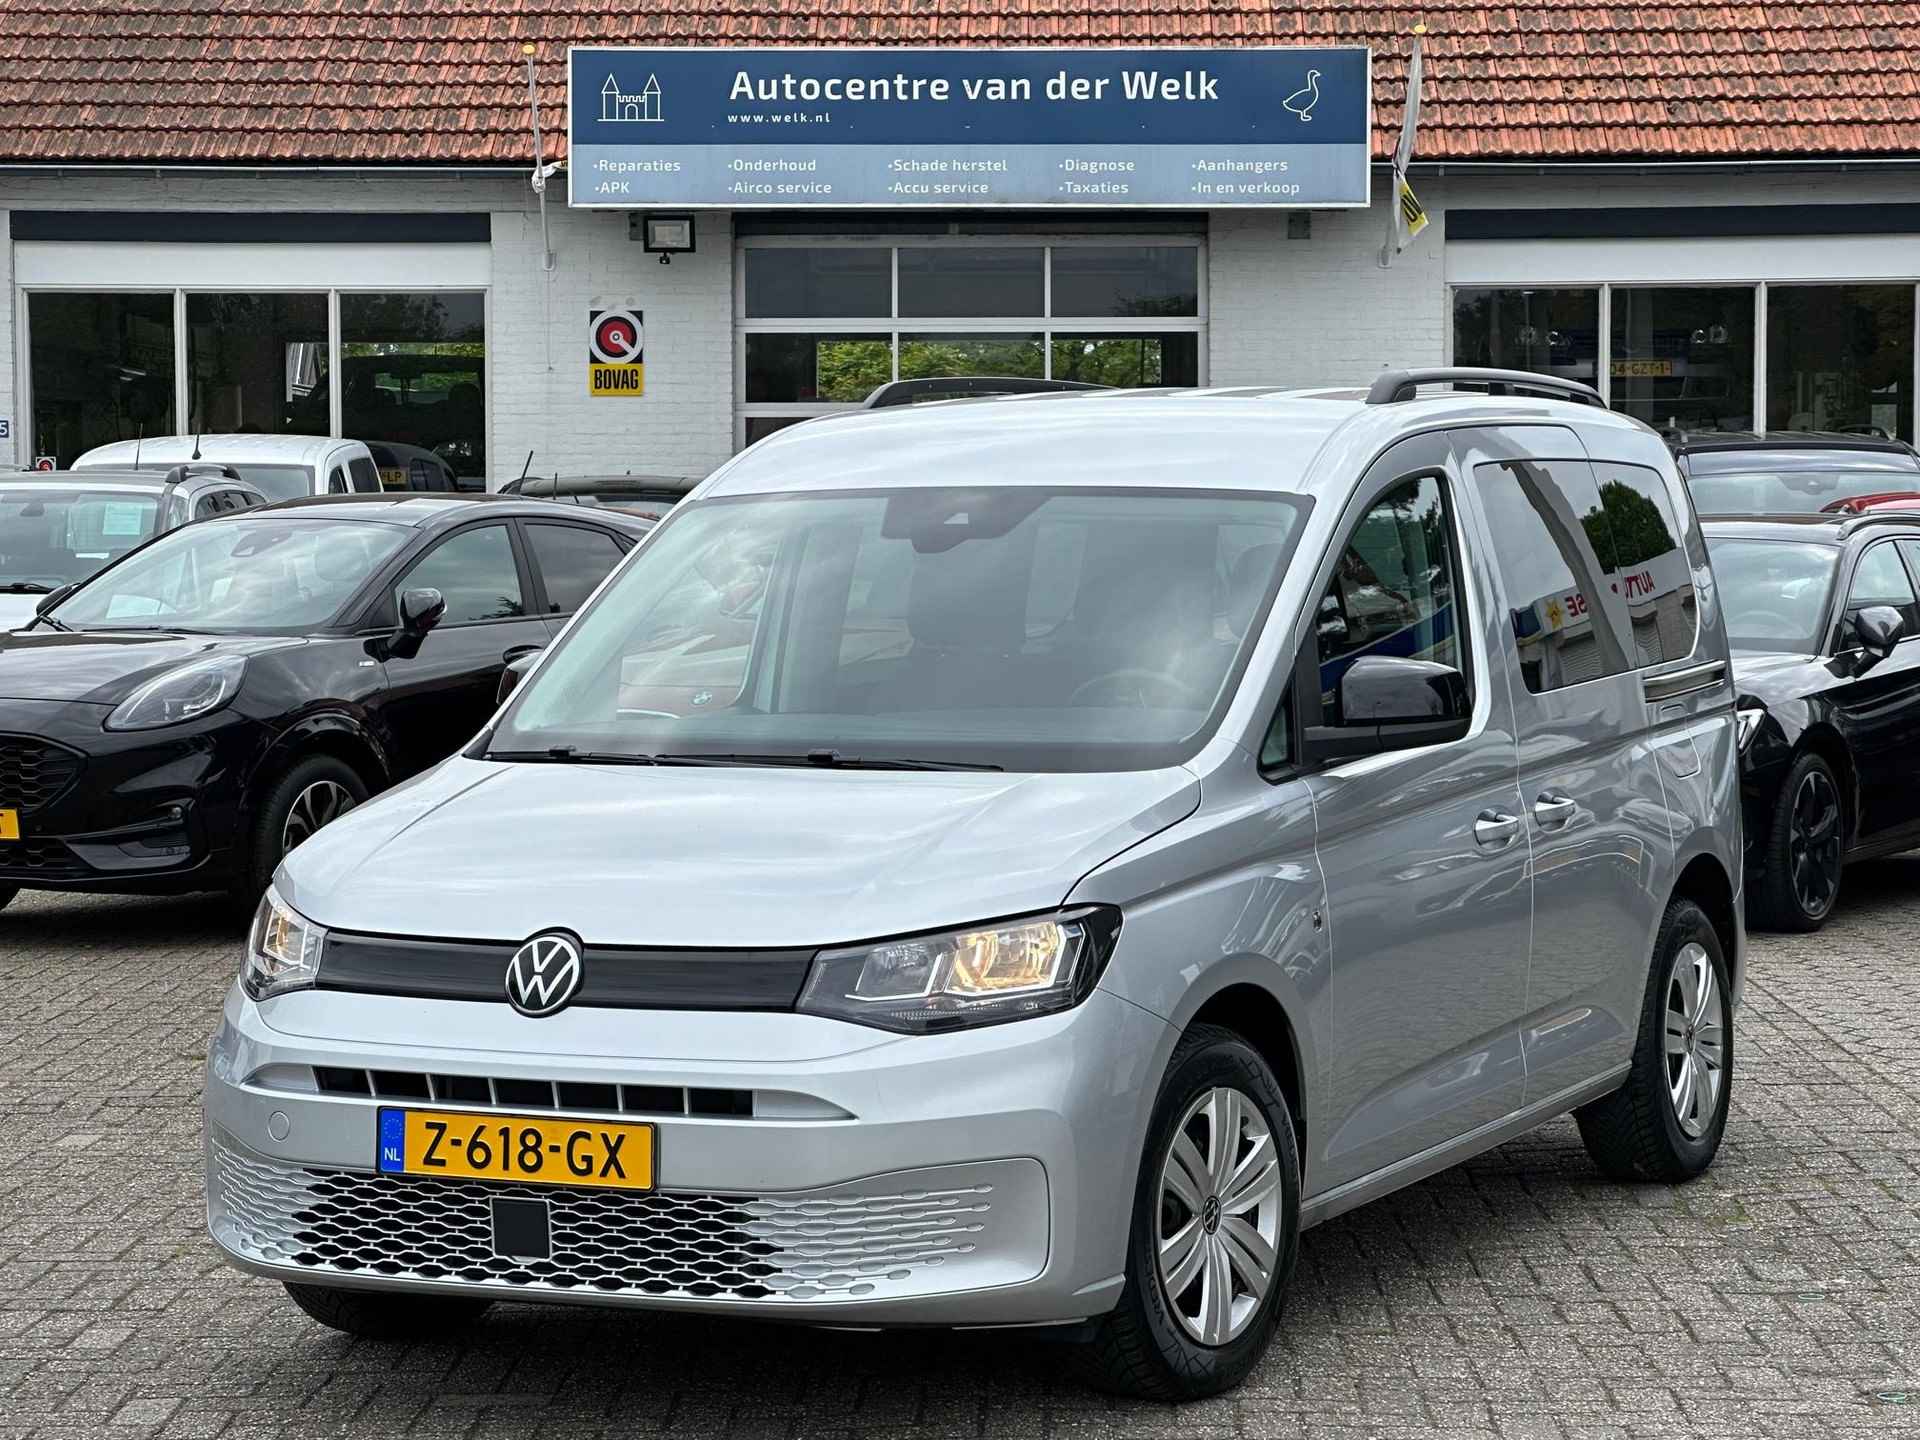 Volkswagen Caddy 1.4 TSI 5p AUTOMAAT! CARPLAY | CRUISE CONTROL | BOVAG!! - 2/30